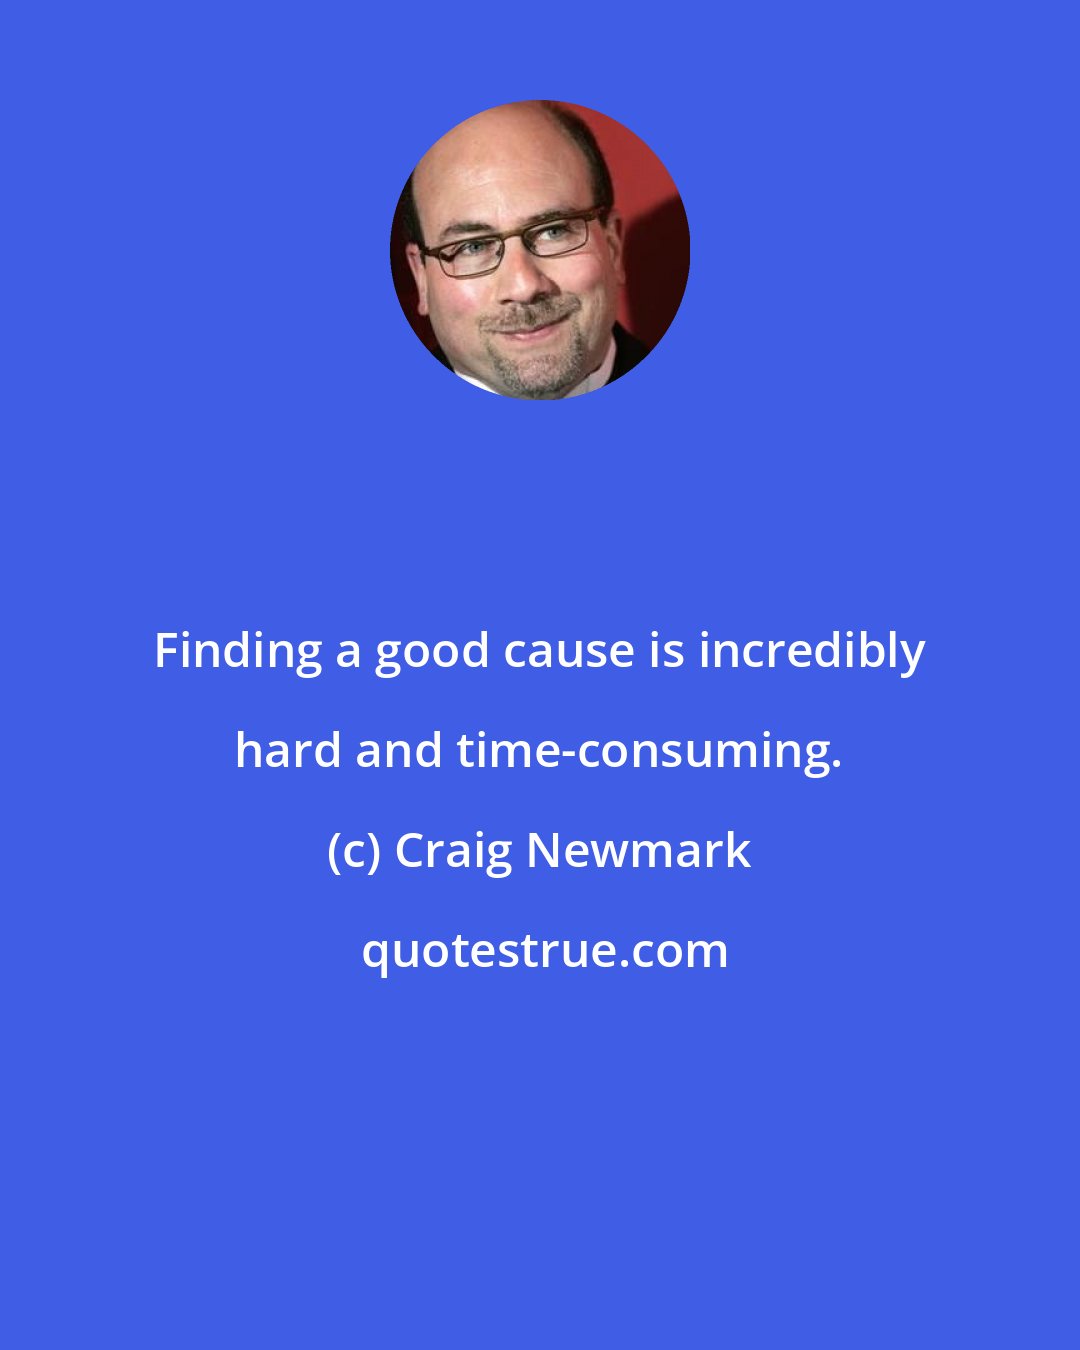 Craig Newmark: Finding a good cause is incredibly hard and time-consuming.